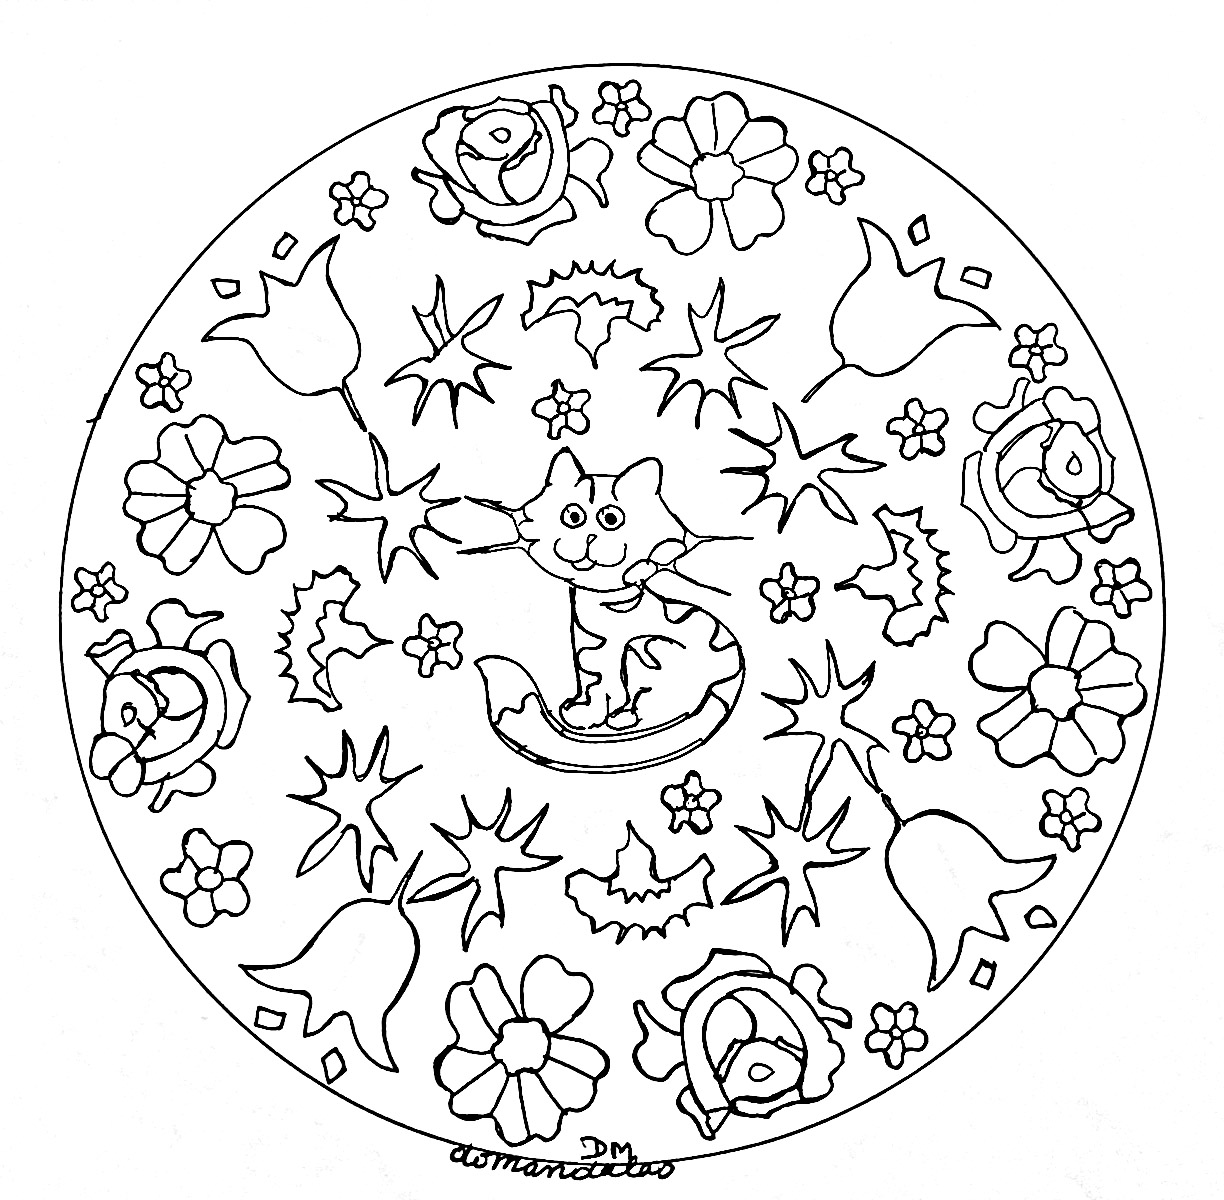 Details relatively easy to color, for a Mandala coloring page very original and of high quality. Feel free to let your instincts decide where to color, and what colors to choose.